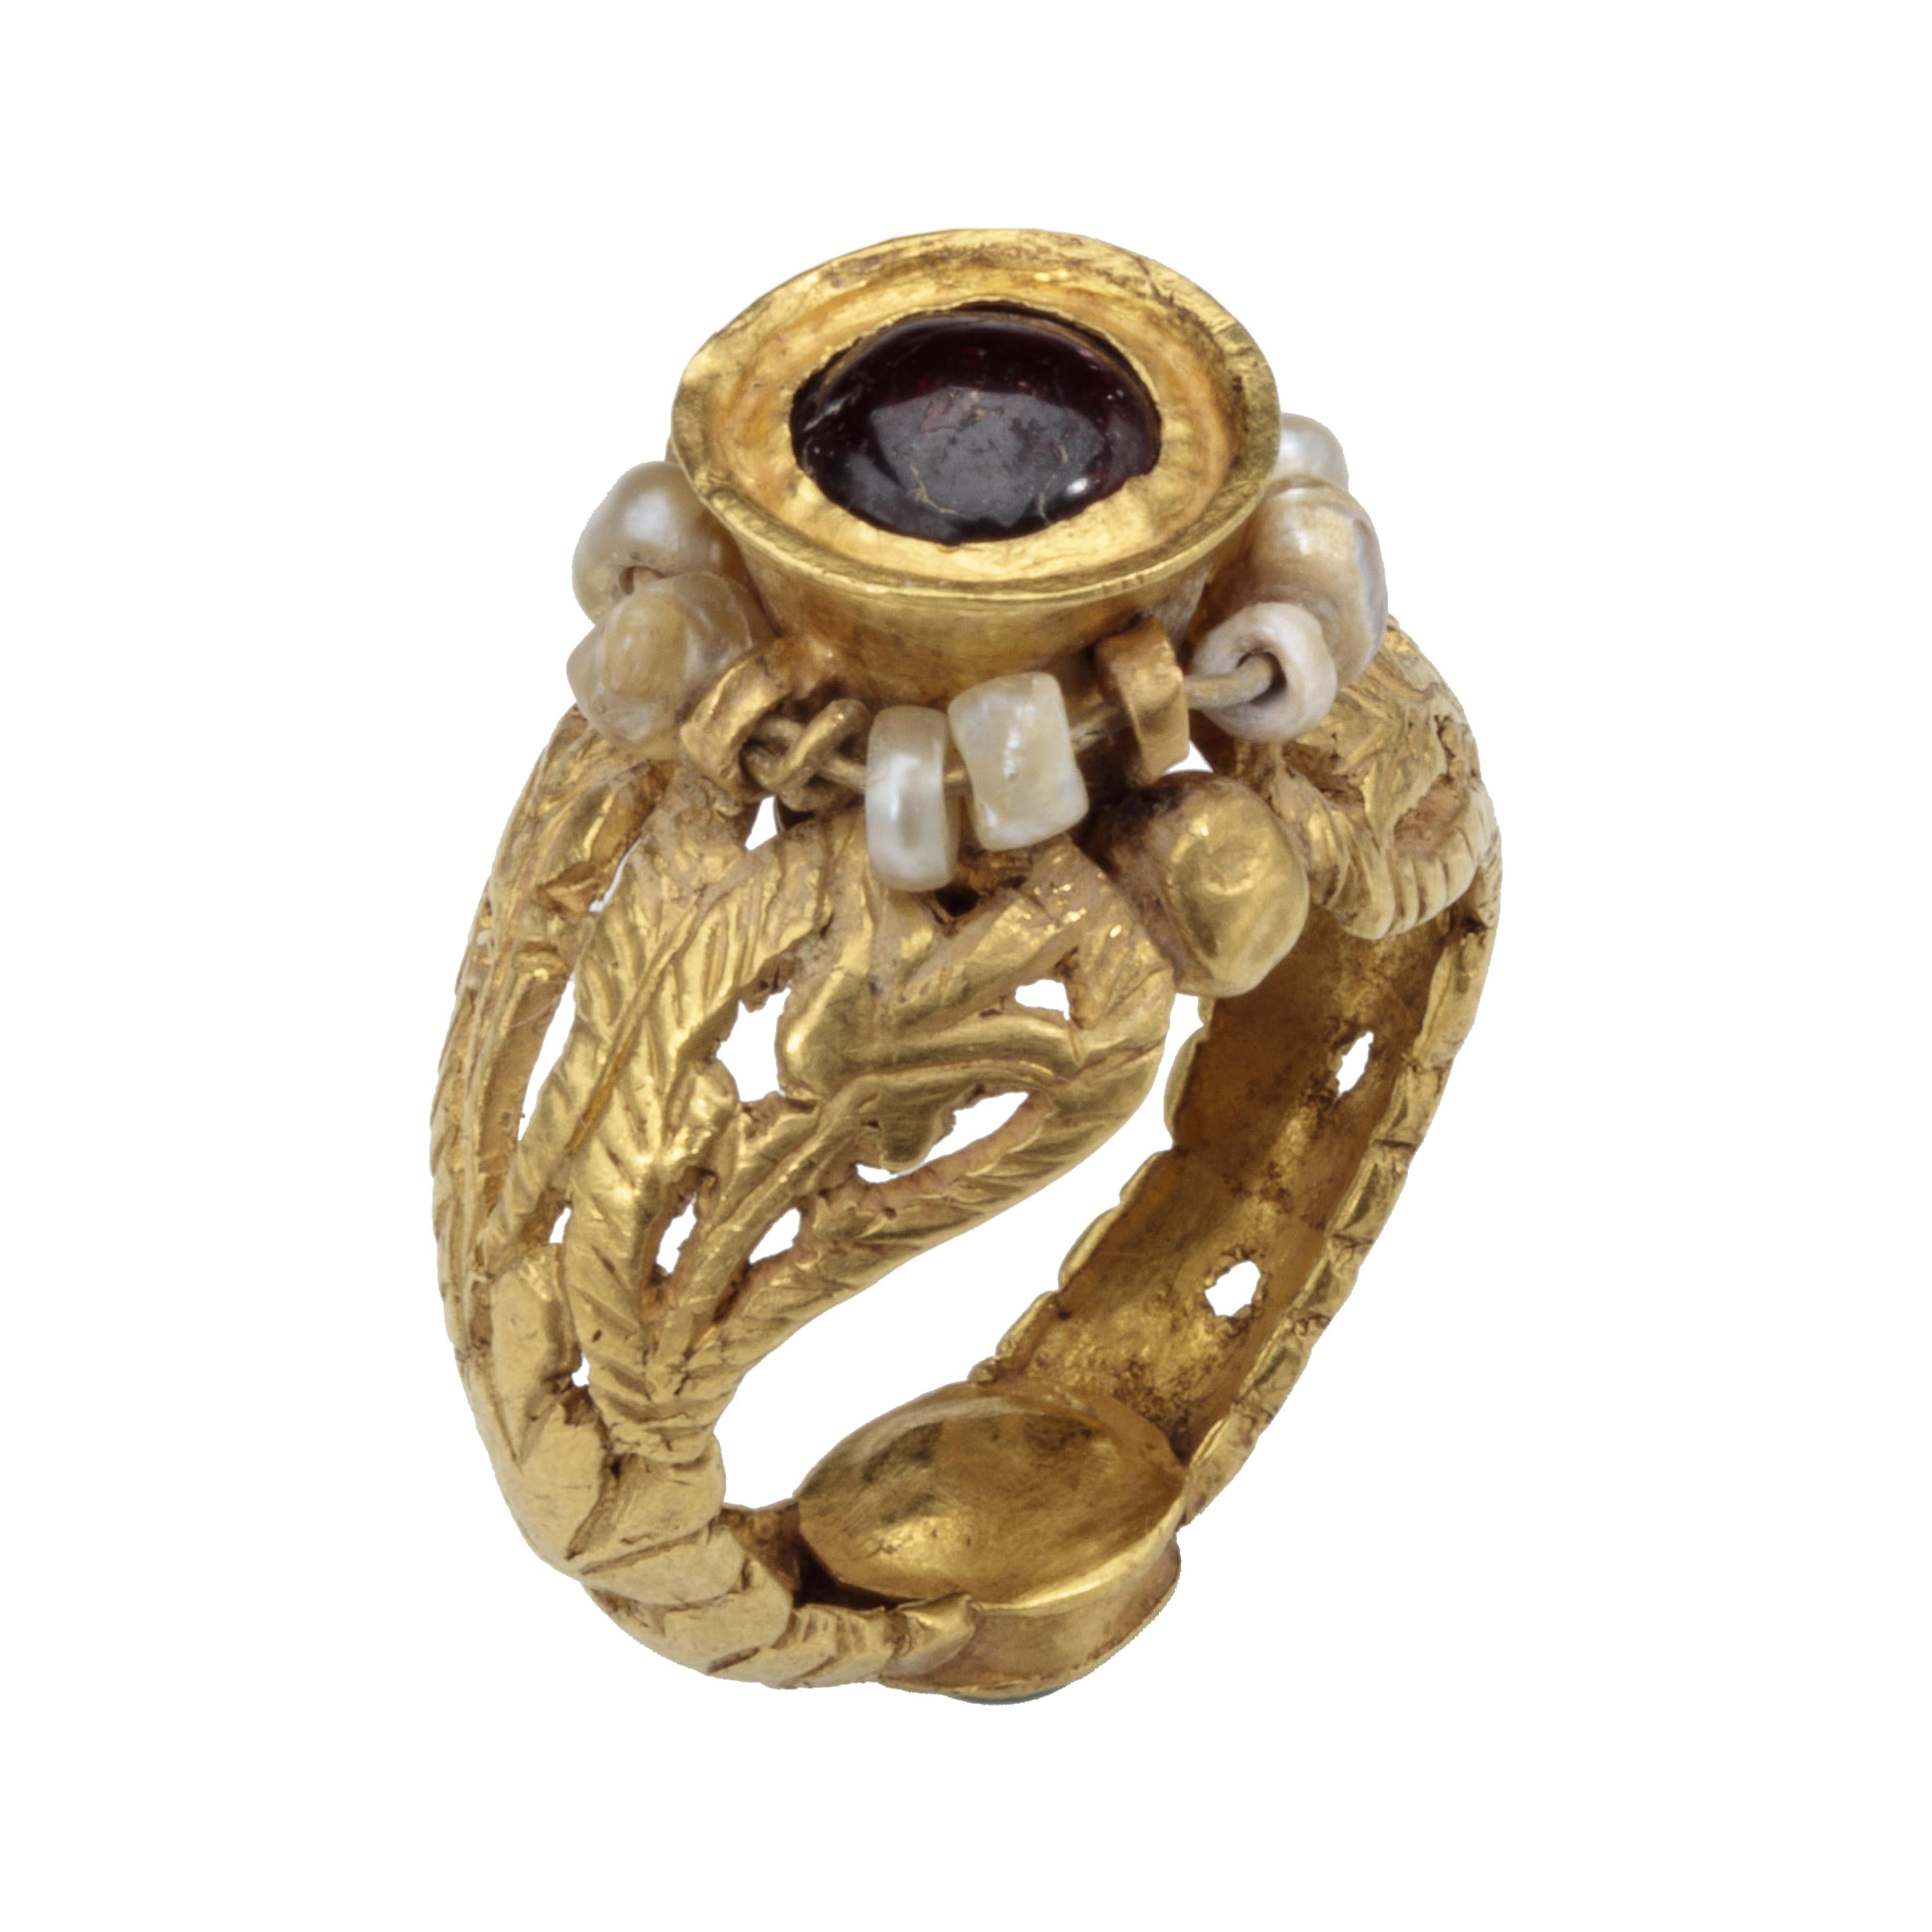 Openwork Double Gemstone Ring of Garnet and Emerald
Byzantine Egypt, Alexandria?, 6th – 7th century AD
Height 32 mm., exterior width of hoop 32 mm., bezel diameter 15 x 16 mm.
Weight 10.5 gr., US size 6, UK size L ½

This 'opus interrasile' hoop is